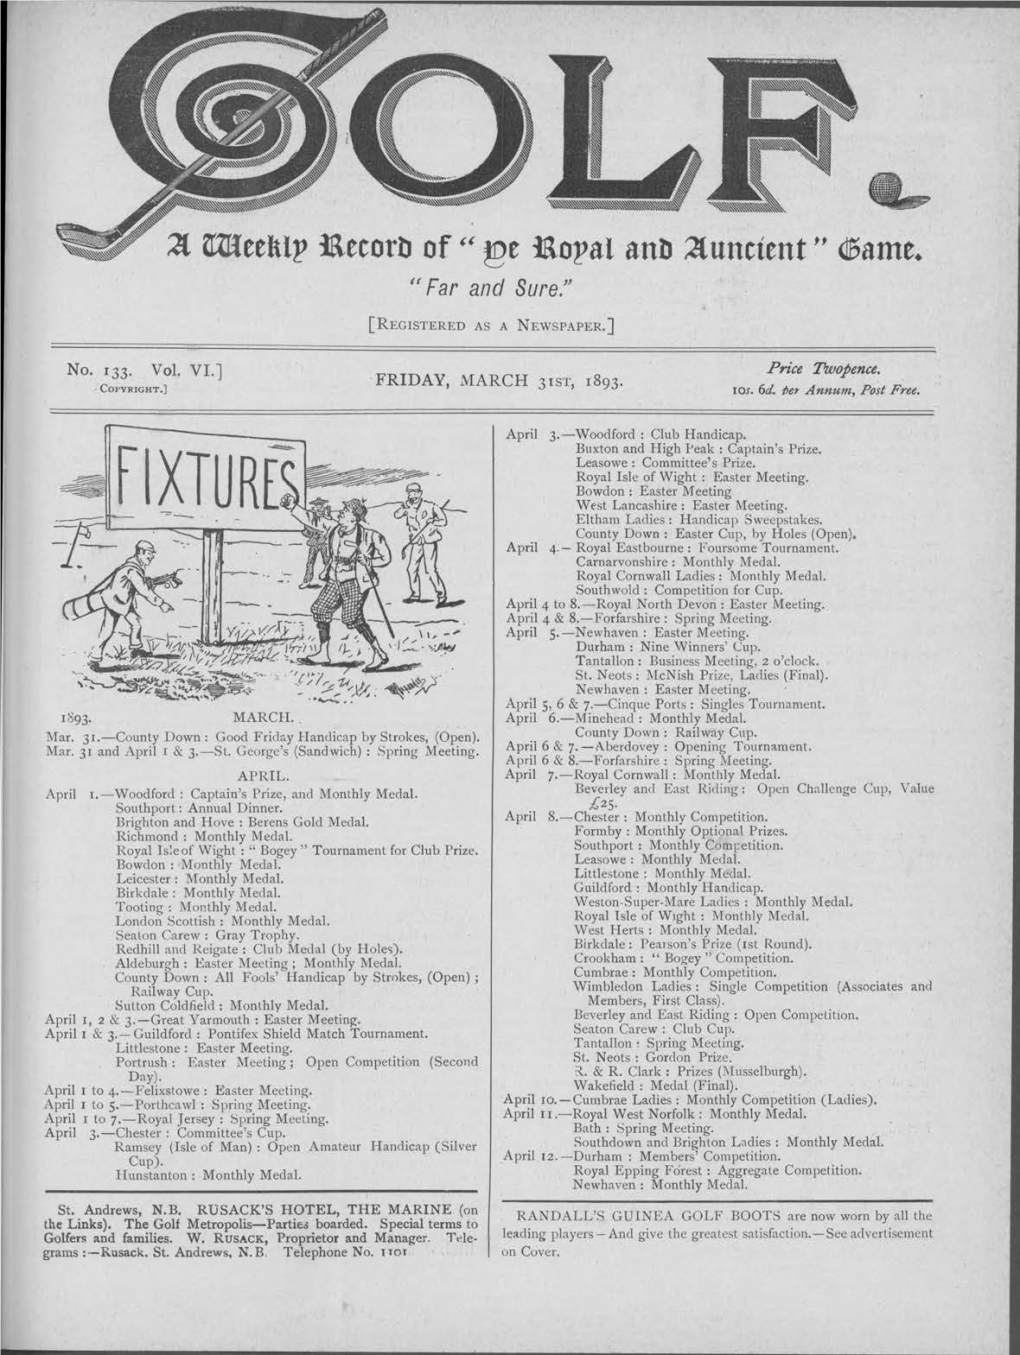 No. 133. Vol. VI.] FRIDAY, MARCH 3 Is T , 1893. St. Andrews, N.B. RUSACK's HOTEL, the MARINE (On the Links). the Golf Metropol